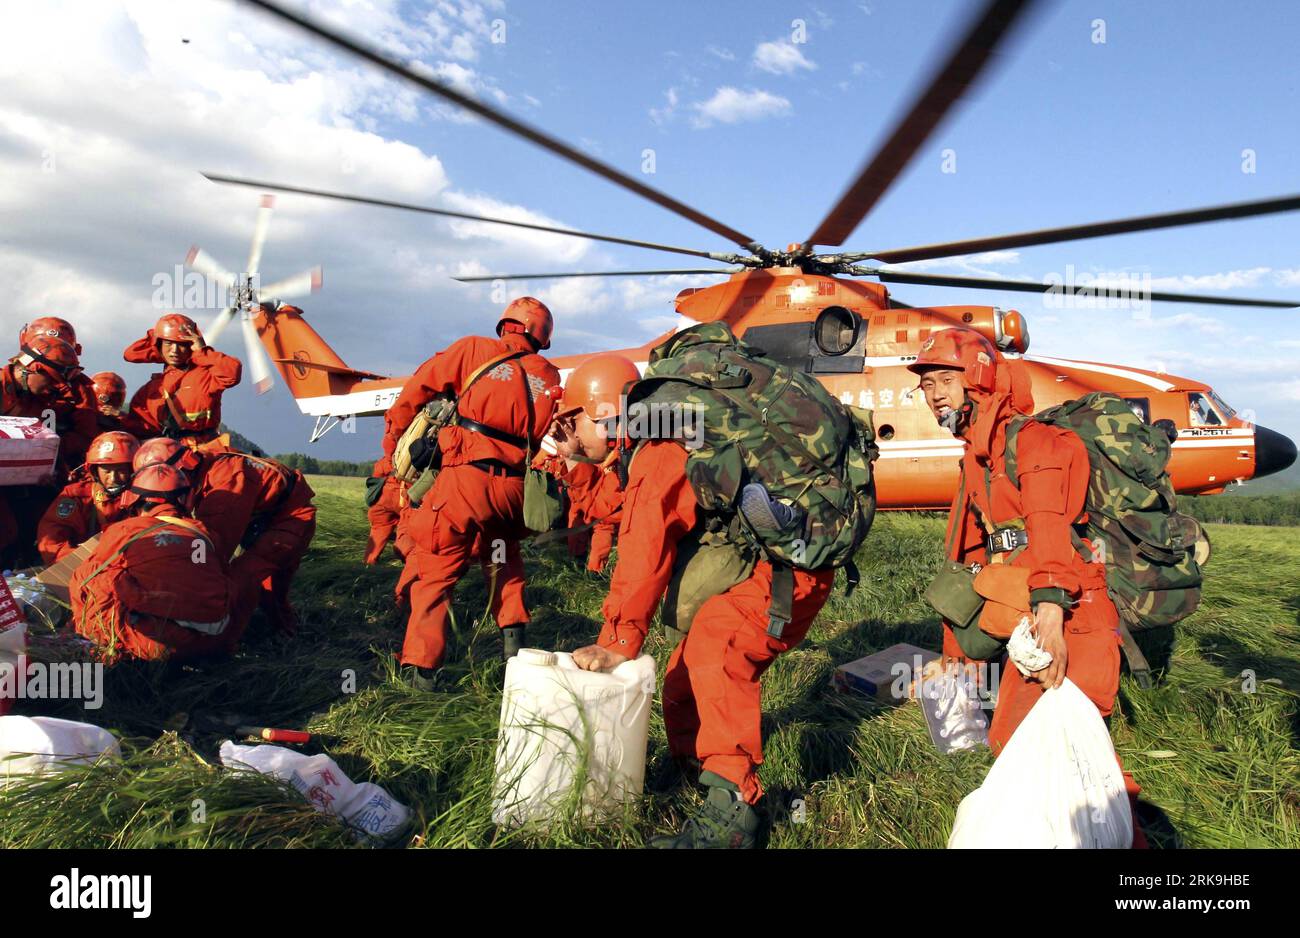 Bildnummer: 54197311  Datum: 01.07.2010  Copyright: imago/Xinhua (100702) -- GREATER HINGGAN, July 2, 2010 (Xinhua) -- A squadron of firefighters take the Russian-made Mi-26TC, the largest and heaviest-lifting helicopter in the world, to rush to their task of extinguishing forest fires, at the Greater Hinggan Mountains, northeast China s Heilongjiang Province, July 1, 2010. China s fire control authorities said Thursday firefighters have launched their final assault on forest fires in mountains in the country s northeast. The fires that started Saturday in the Greater Hinggan Mountains in Inne Stock Photo